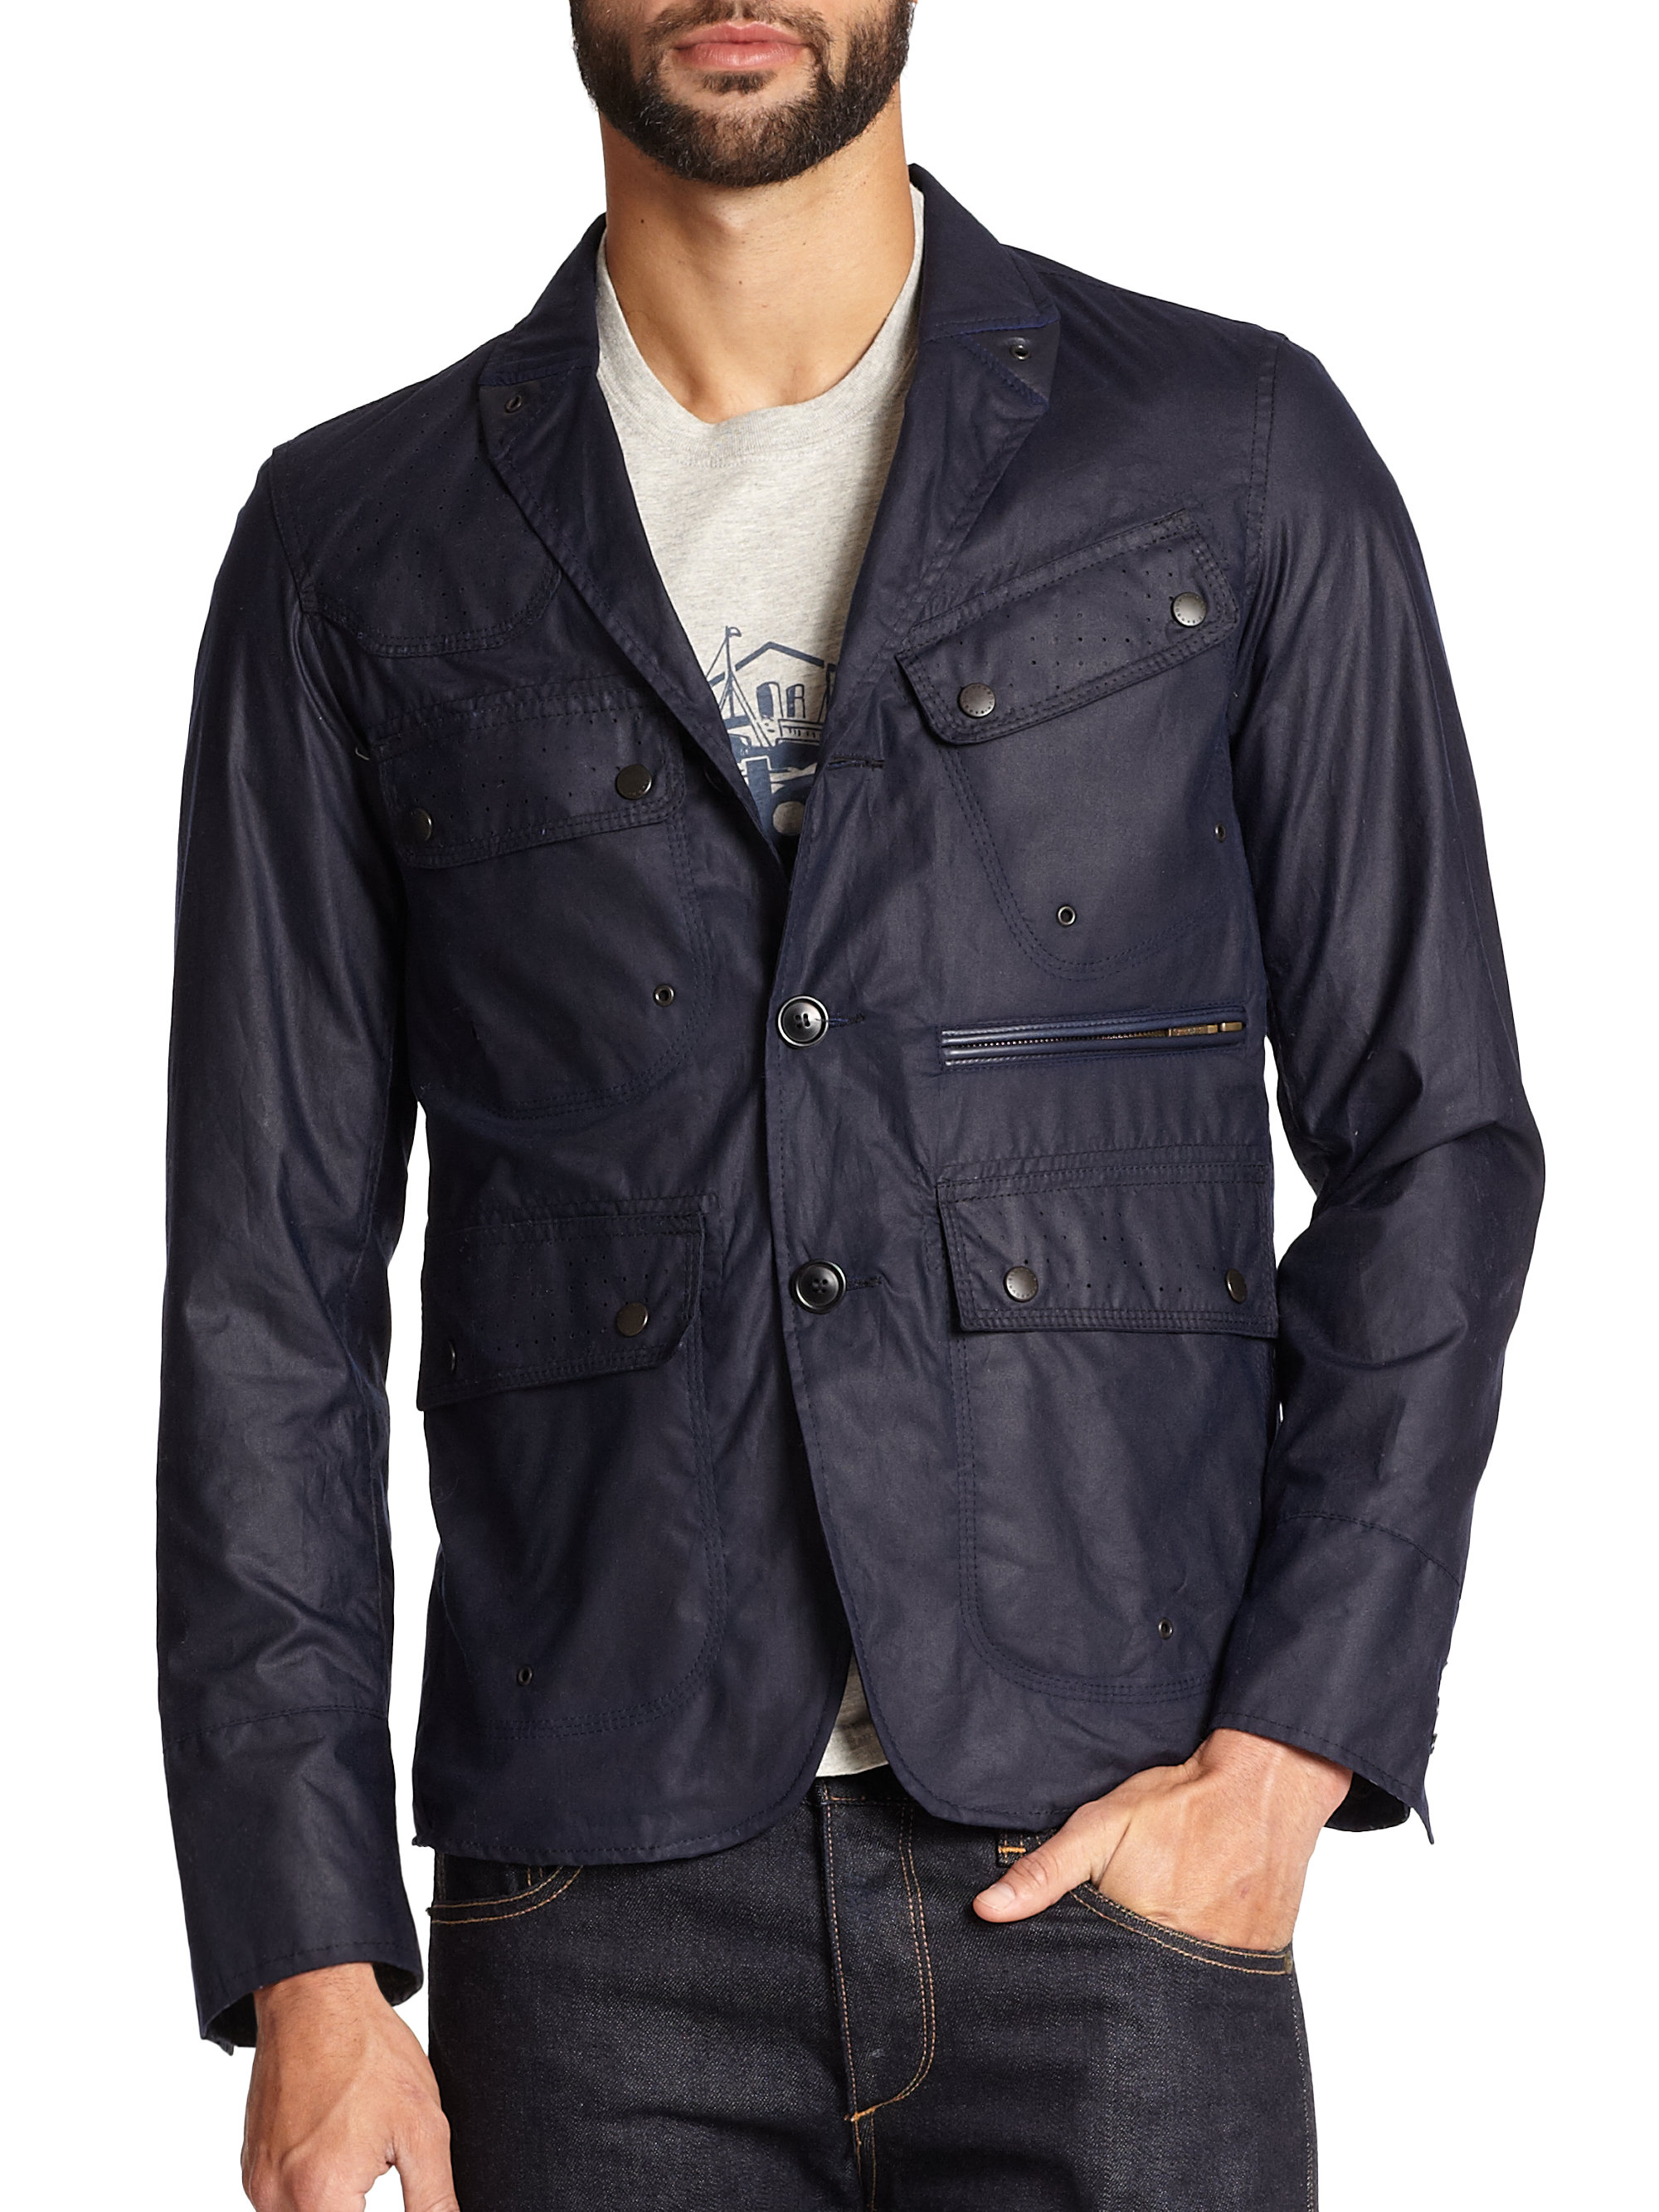 Lyst - Barbour Waxed Cotton Jacket in Blue for Men